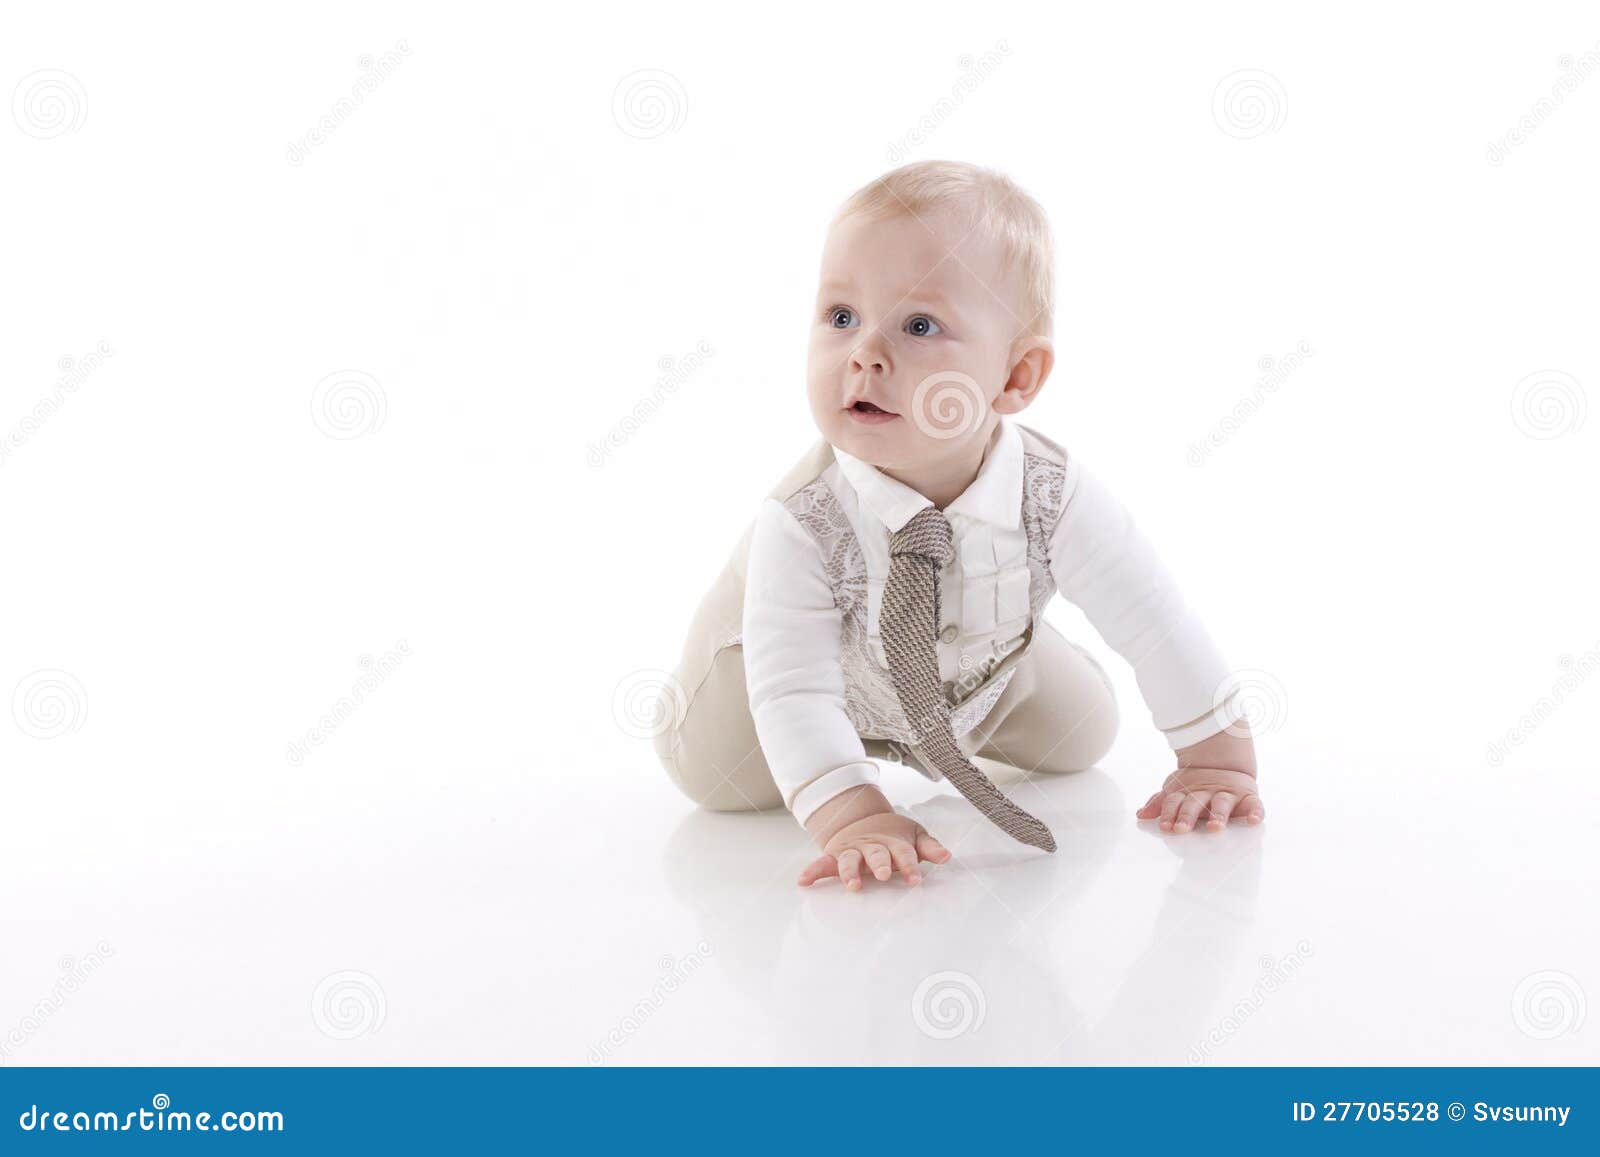 smiling baby-boy in a romper suit crawling